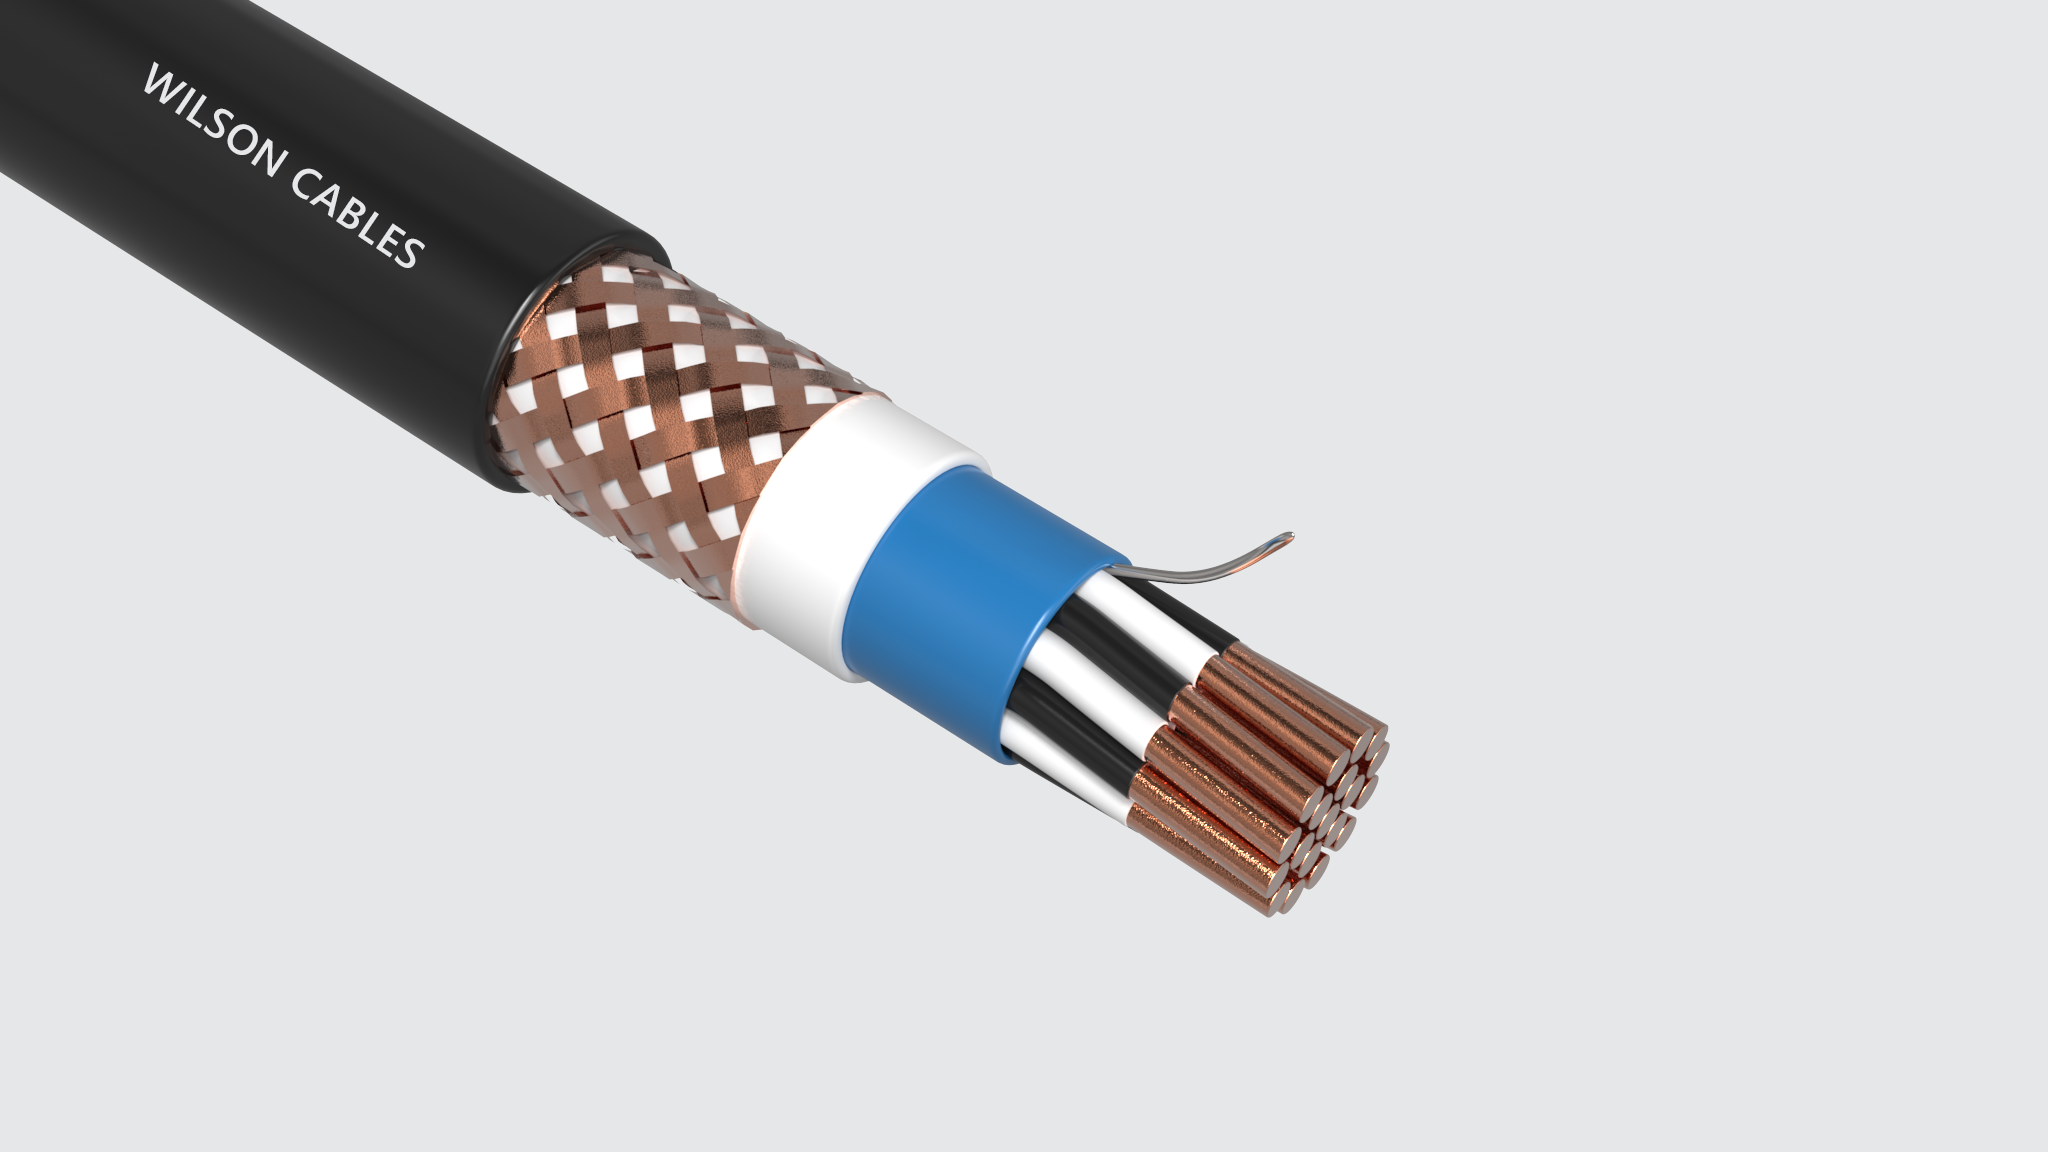 MIC-200Q (SST) / MIC-200C (SST) LSOH Sheathed Shipboard Braided Instrumentation Cables